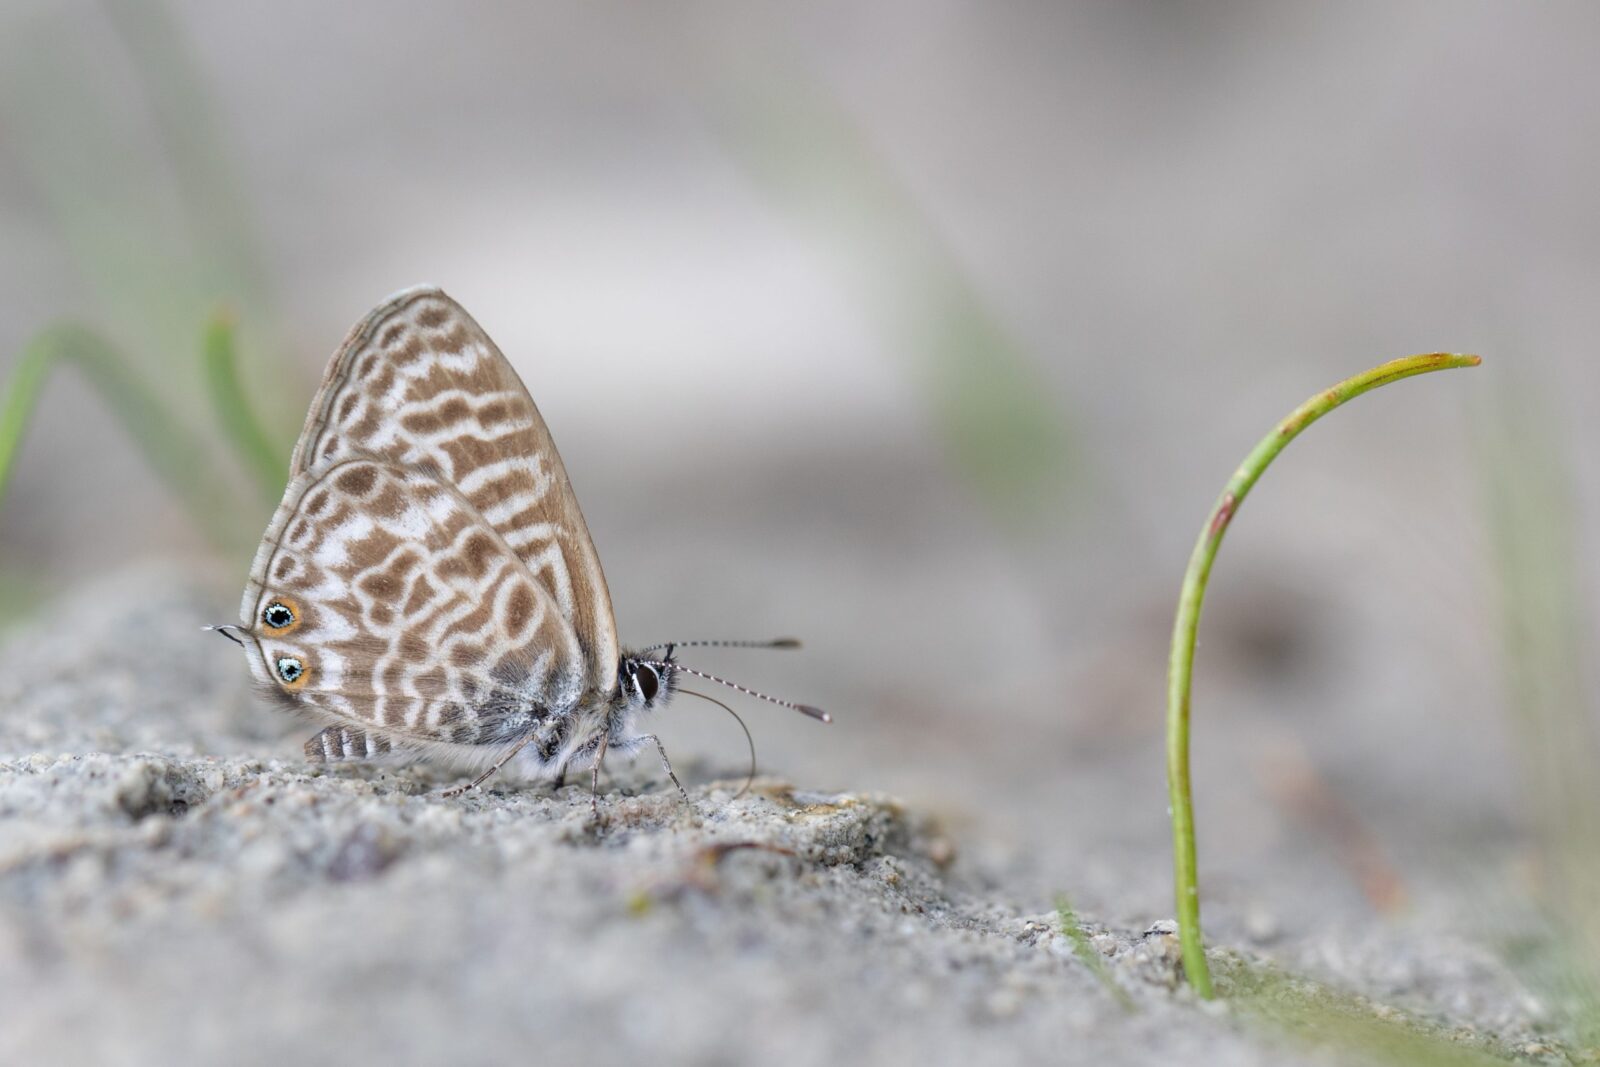 Lang’s Short-tailed Blue (Leptotes pirithous) Credit Alex Perry